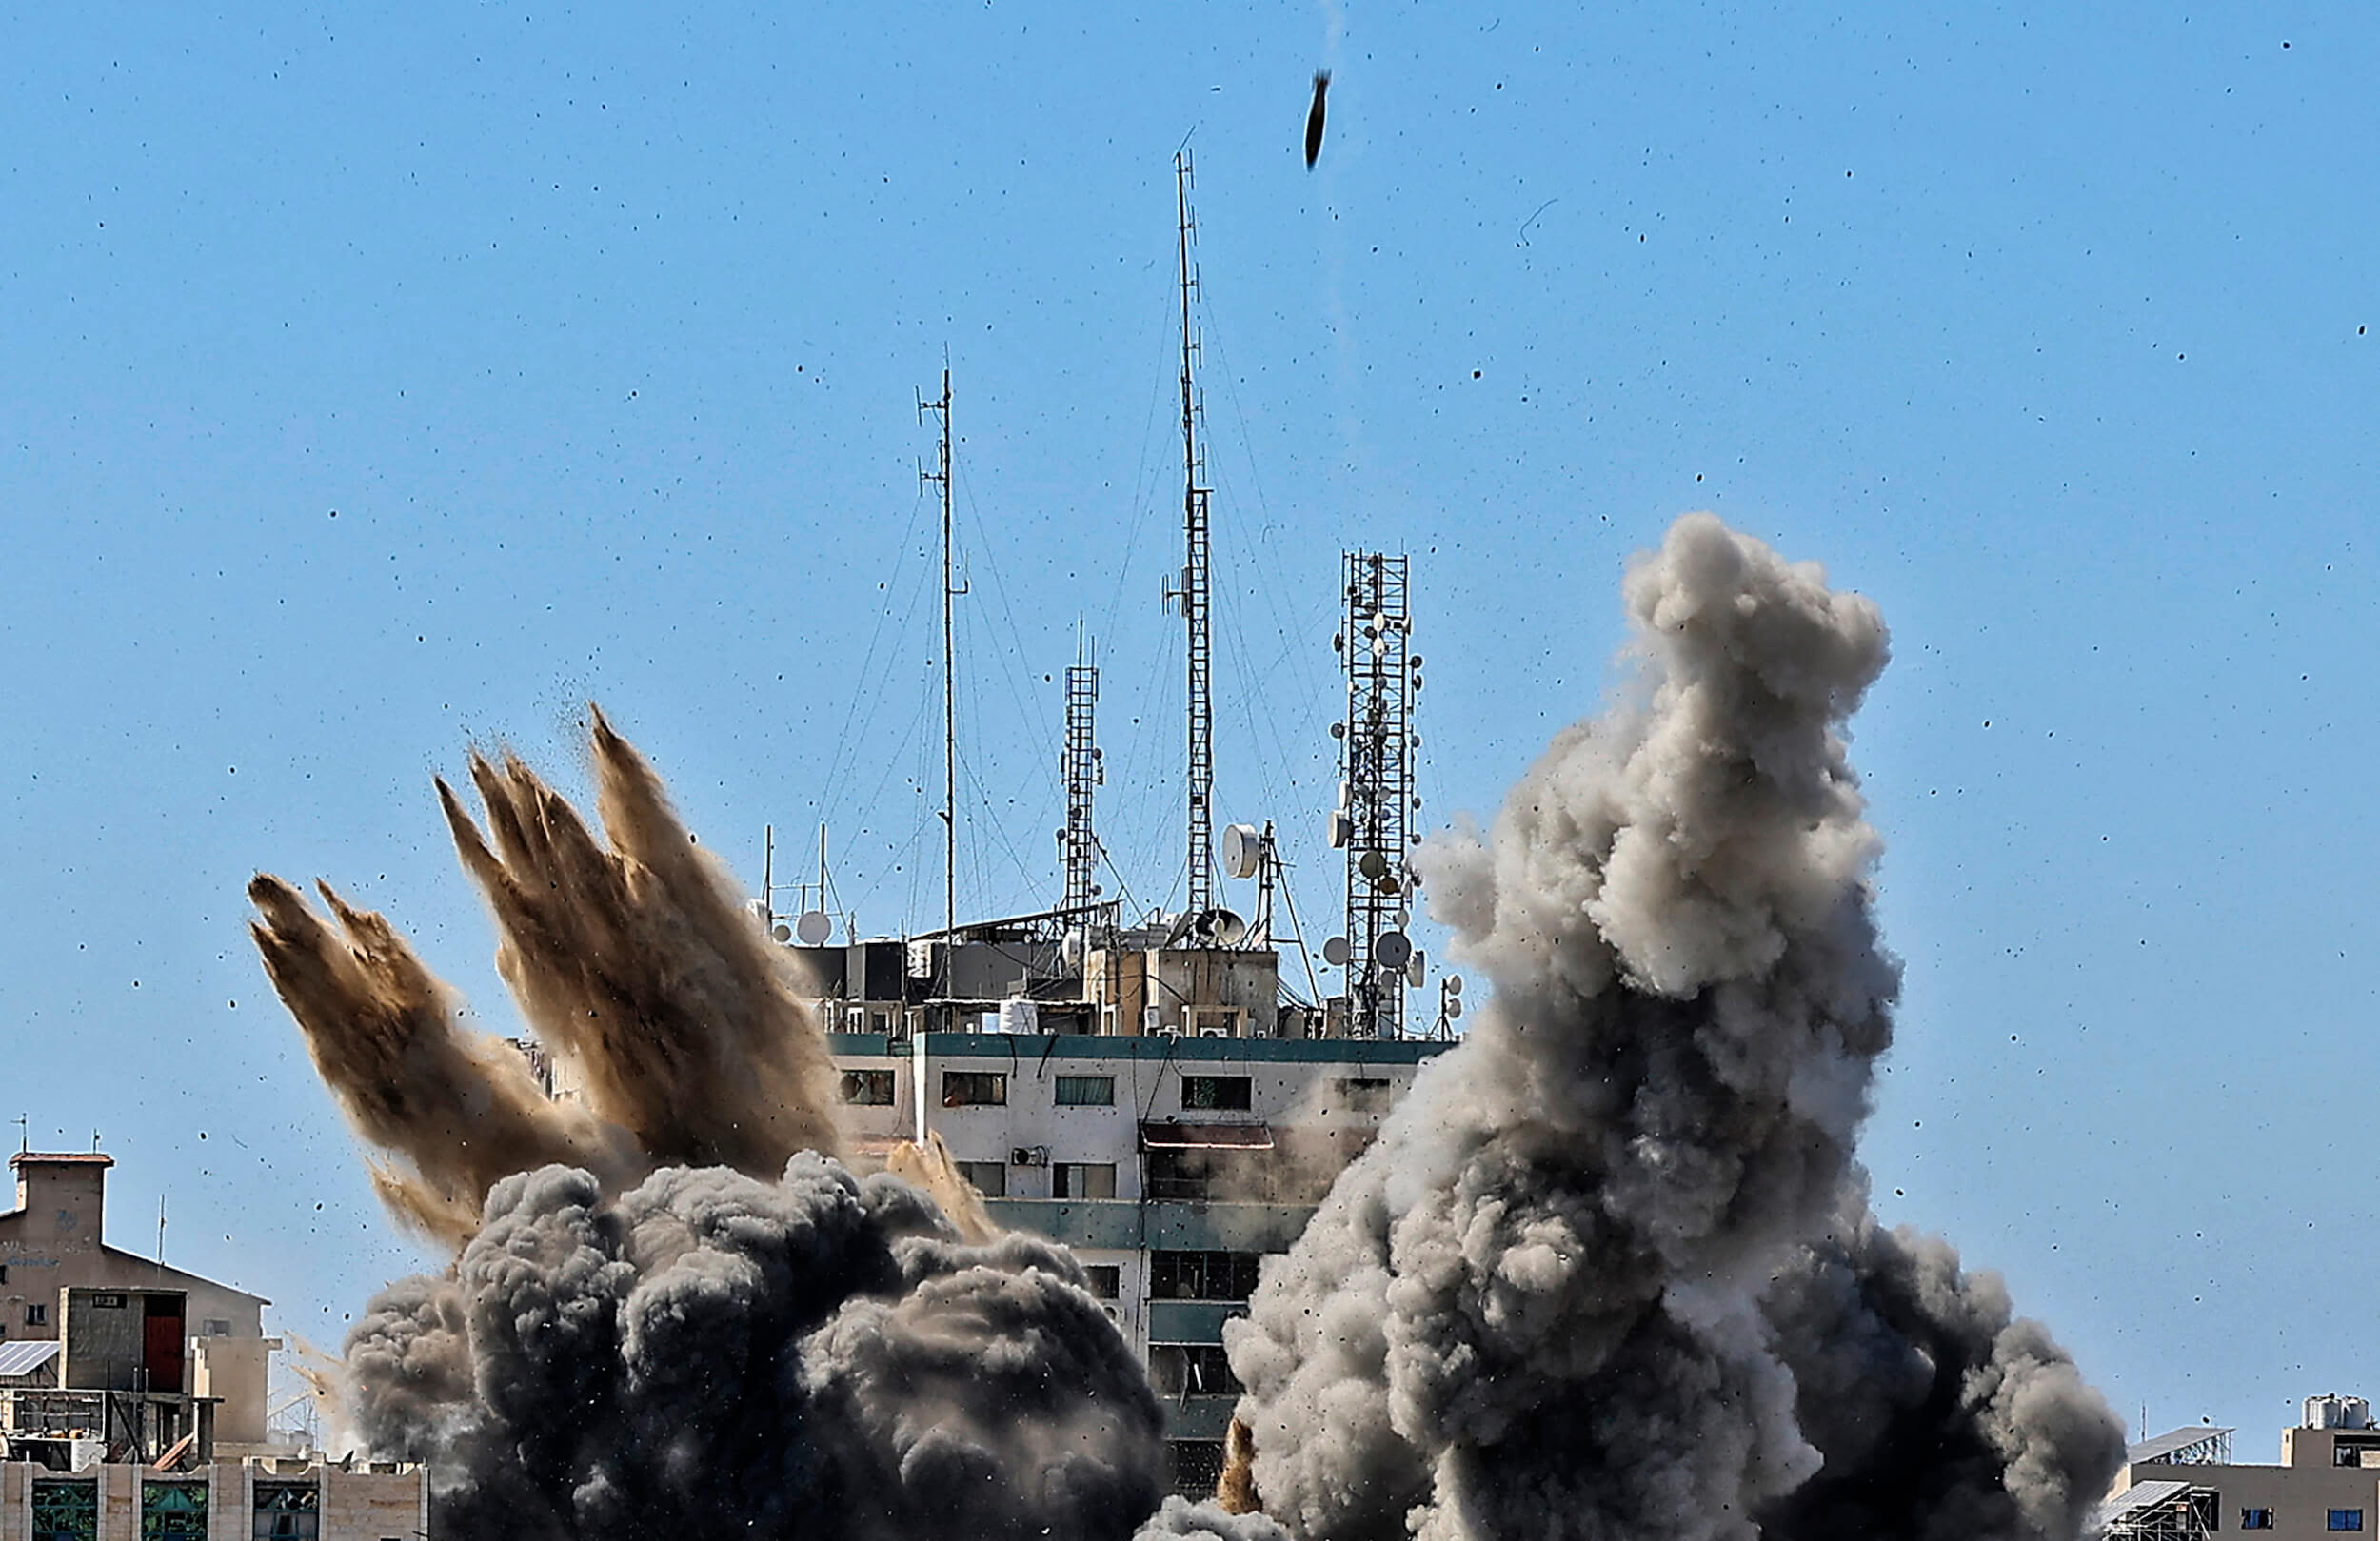 Israel made a terrible tactical blunder in targeting the AP — one it's made many times before